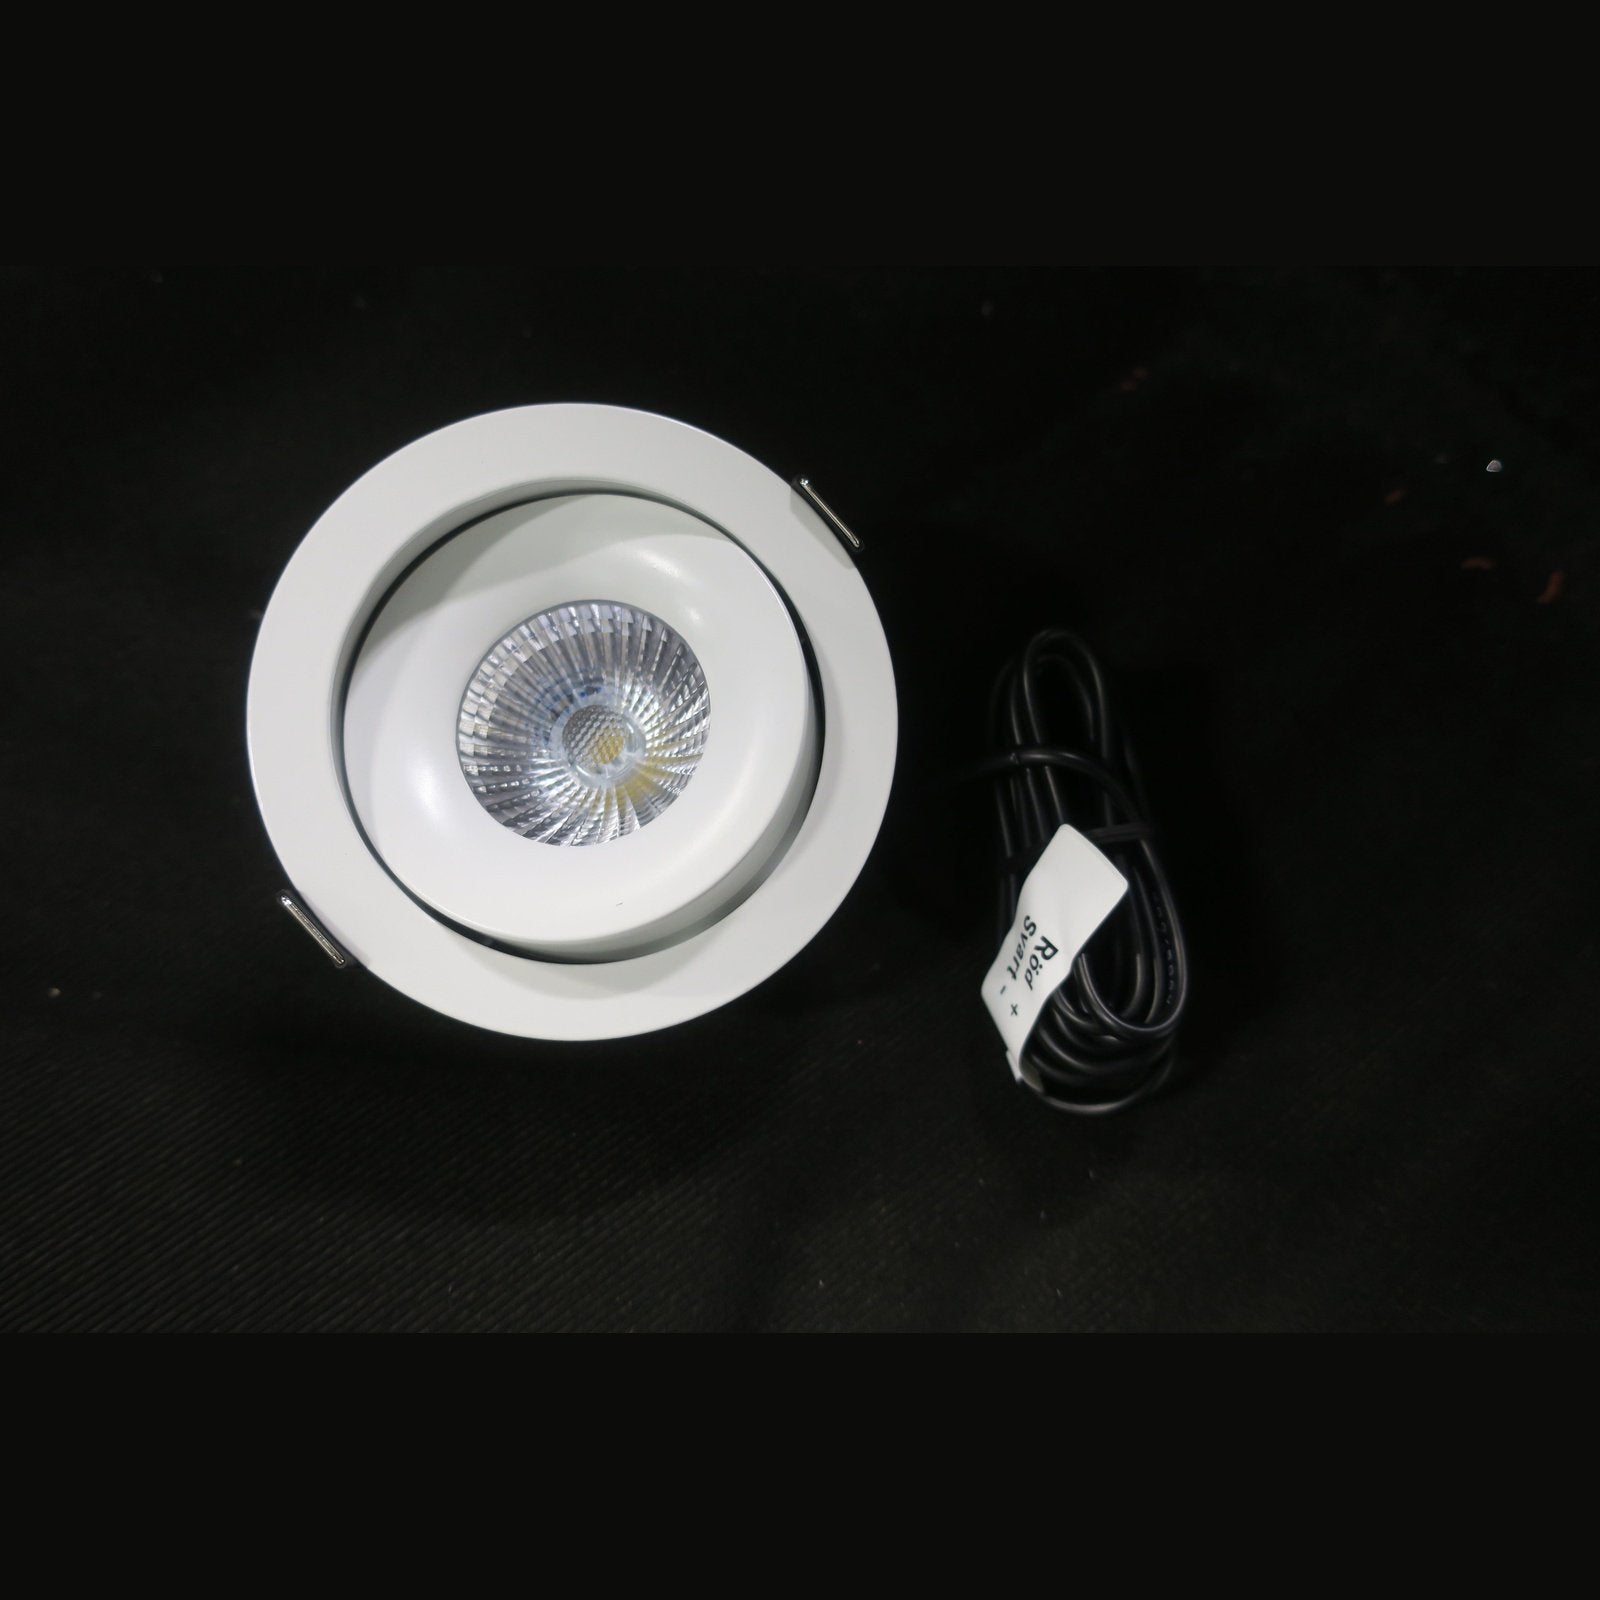 Shop LED Natural White Recessed Adjustable Downlight 7W 4500K - JS-A05 | Buy Online at Supply Master Accra, Ghana Lamps & Lightings Buy Tools hardware Building materials